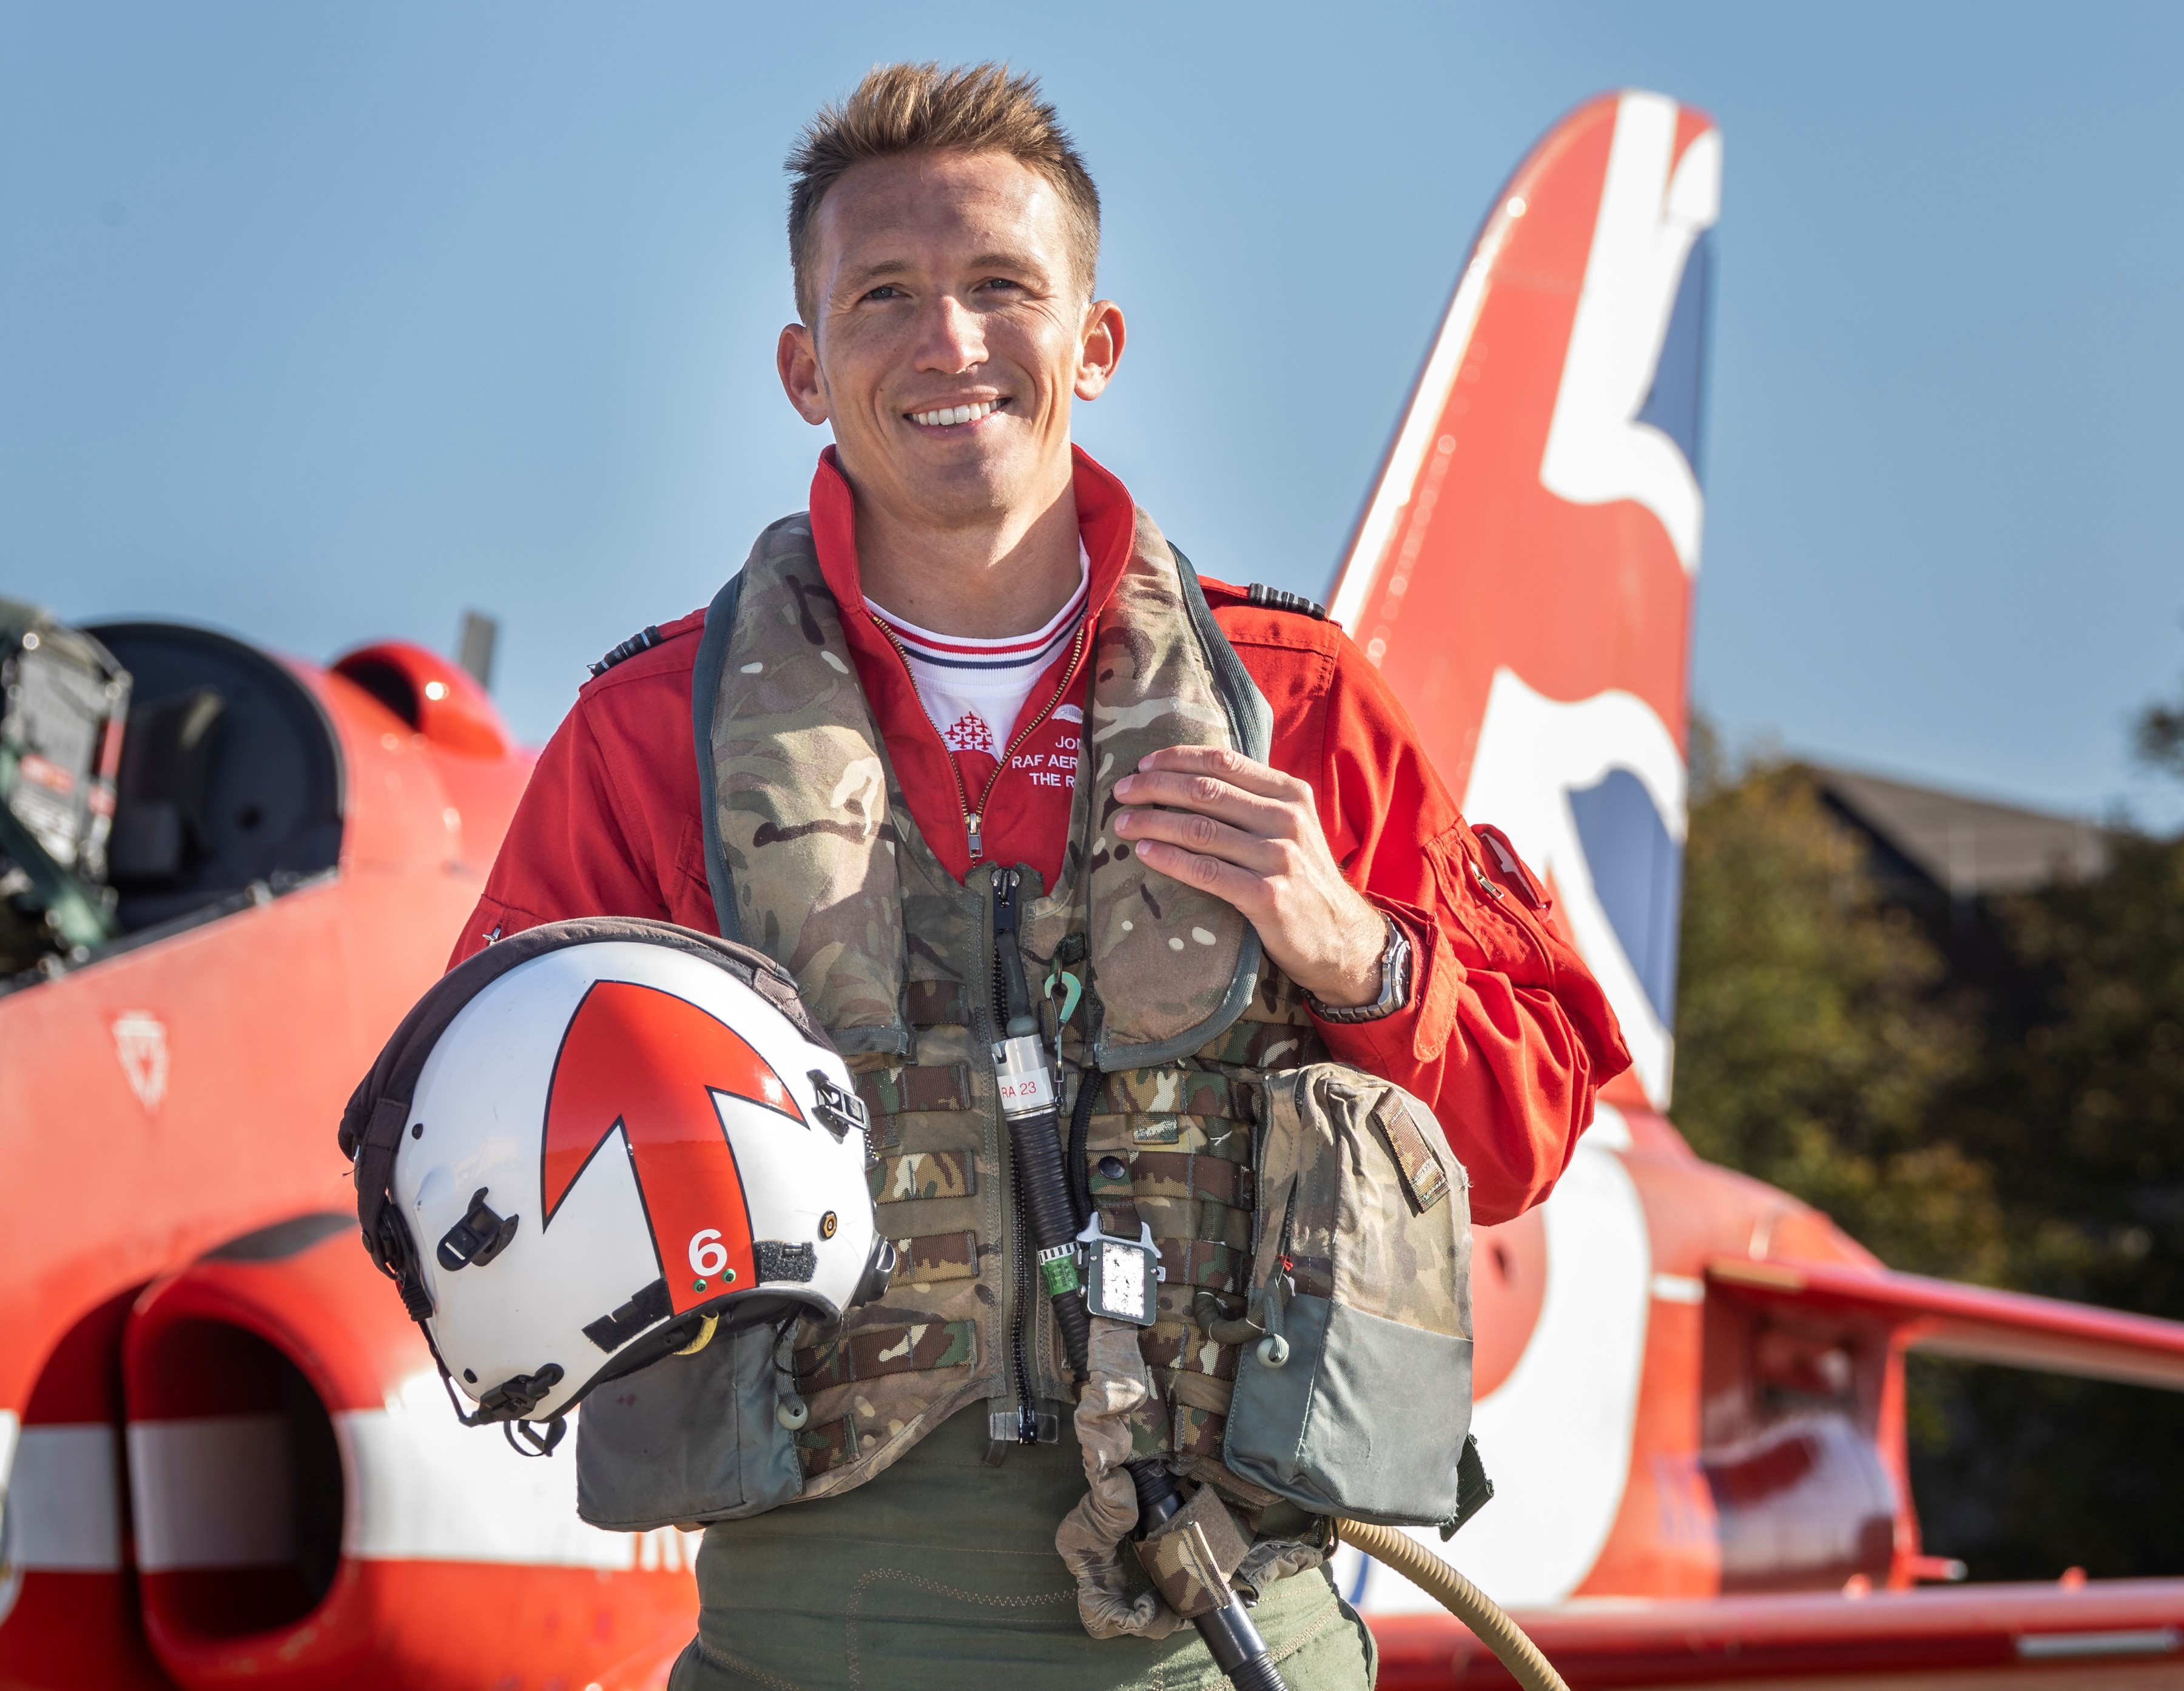 Sqn Ldr Bond has completed four seasons as a Red Arrows pilot.